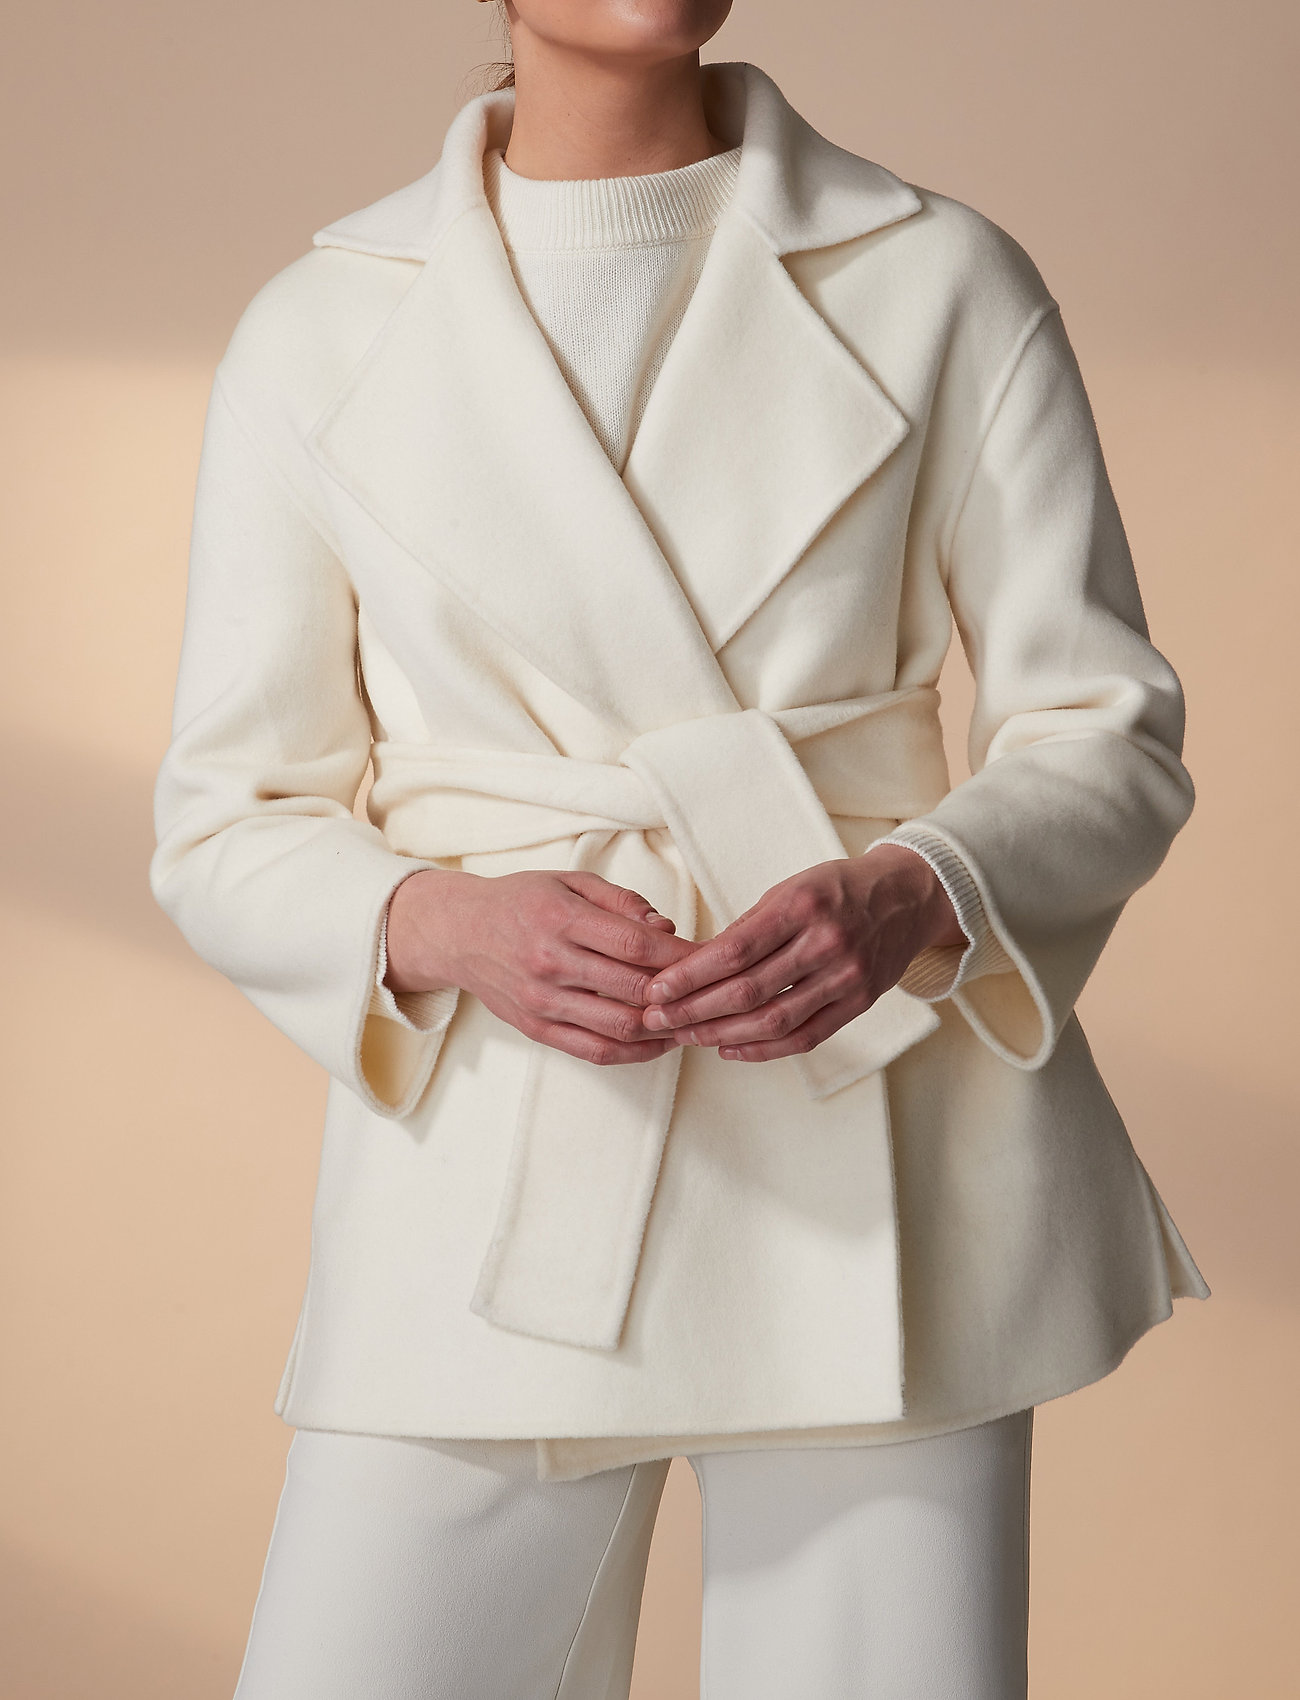 Marville Road - Hedvig Wrap Wool Jacket - winter white - 0